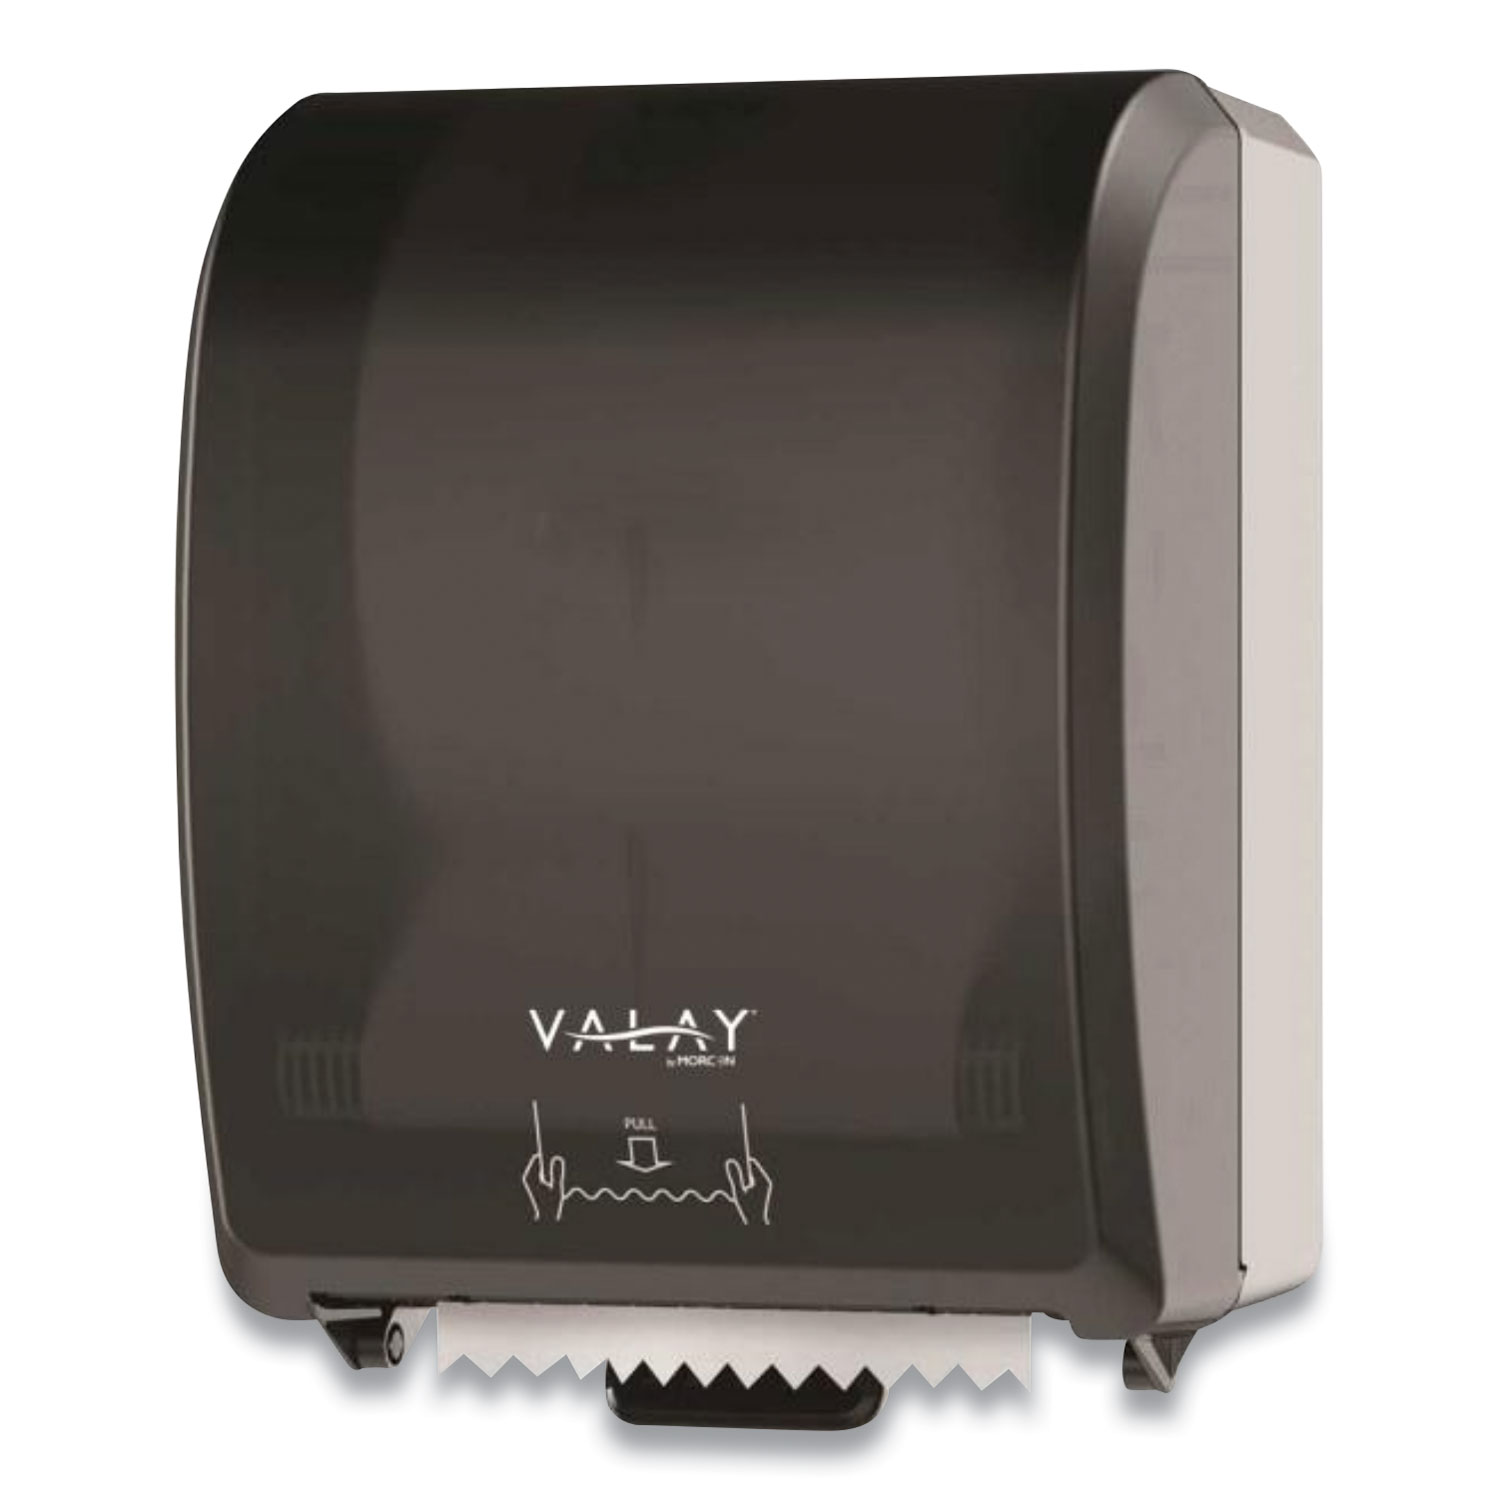 Morcon Tissue Valay Controlled Towel Dispenser, Y-Notch, 12.3 x 9.3 x 15.9, Black